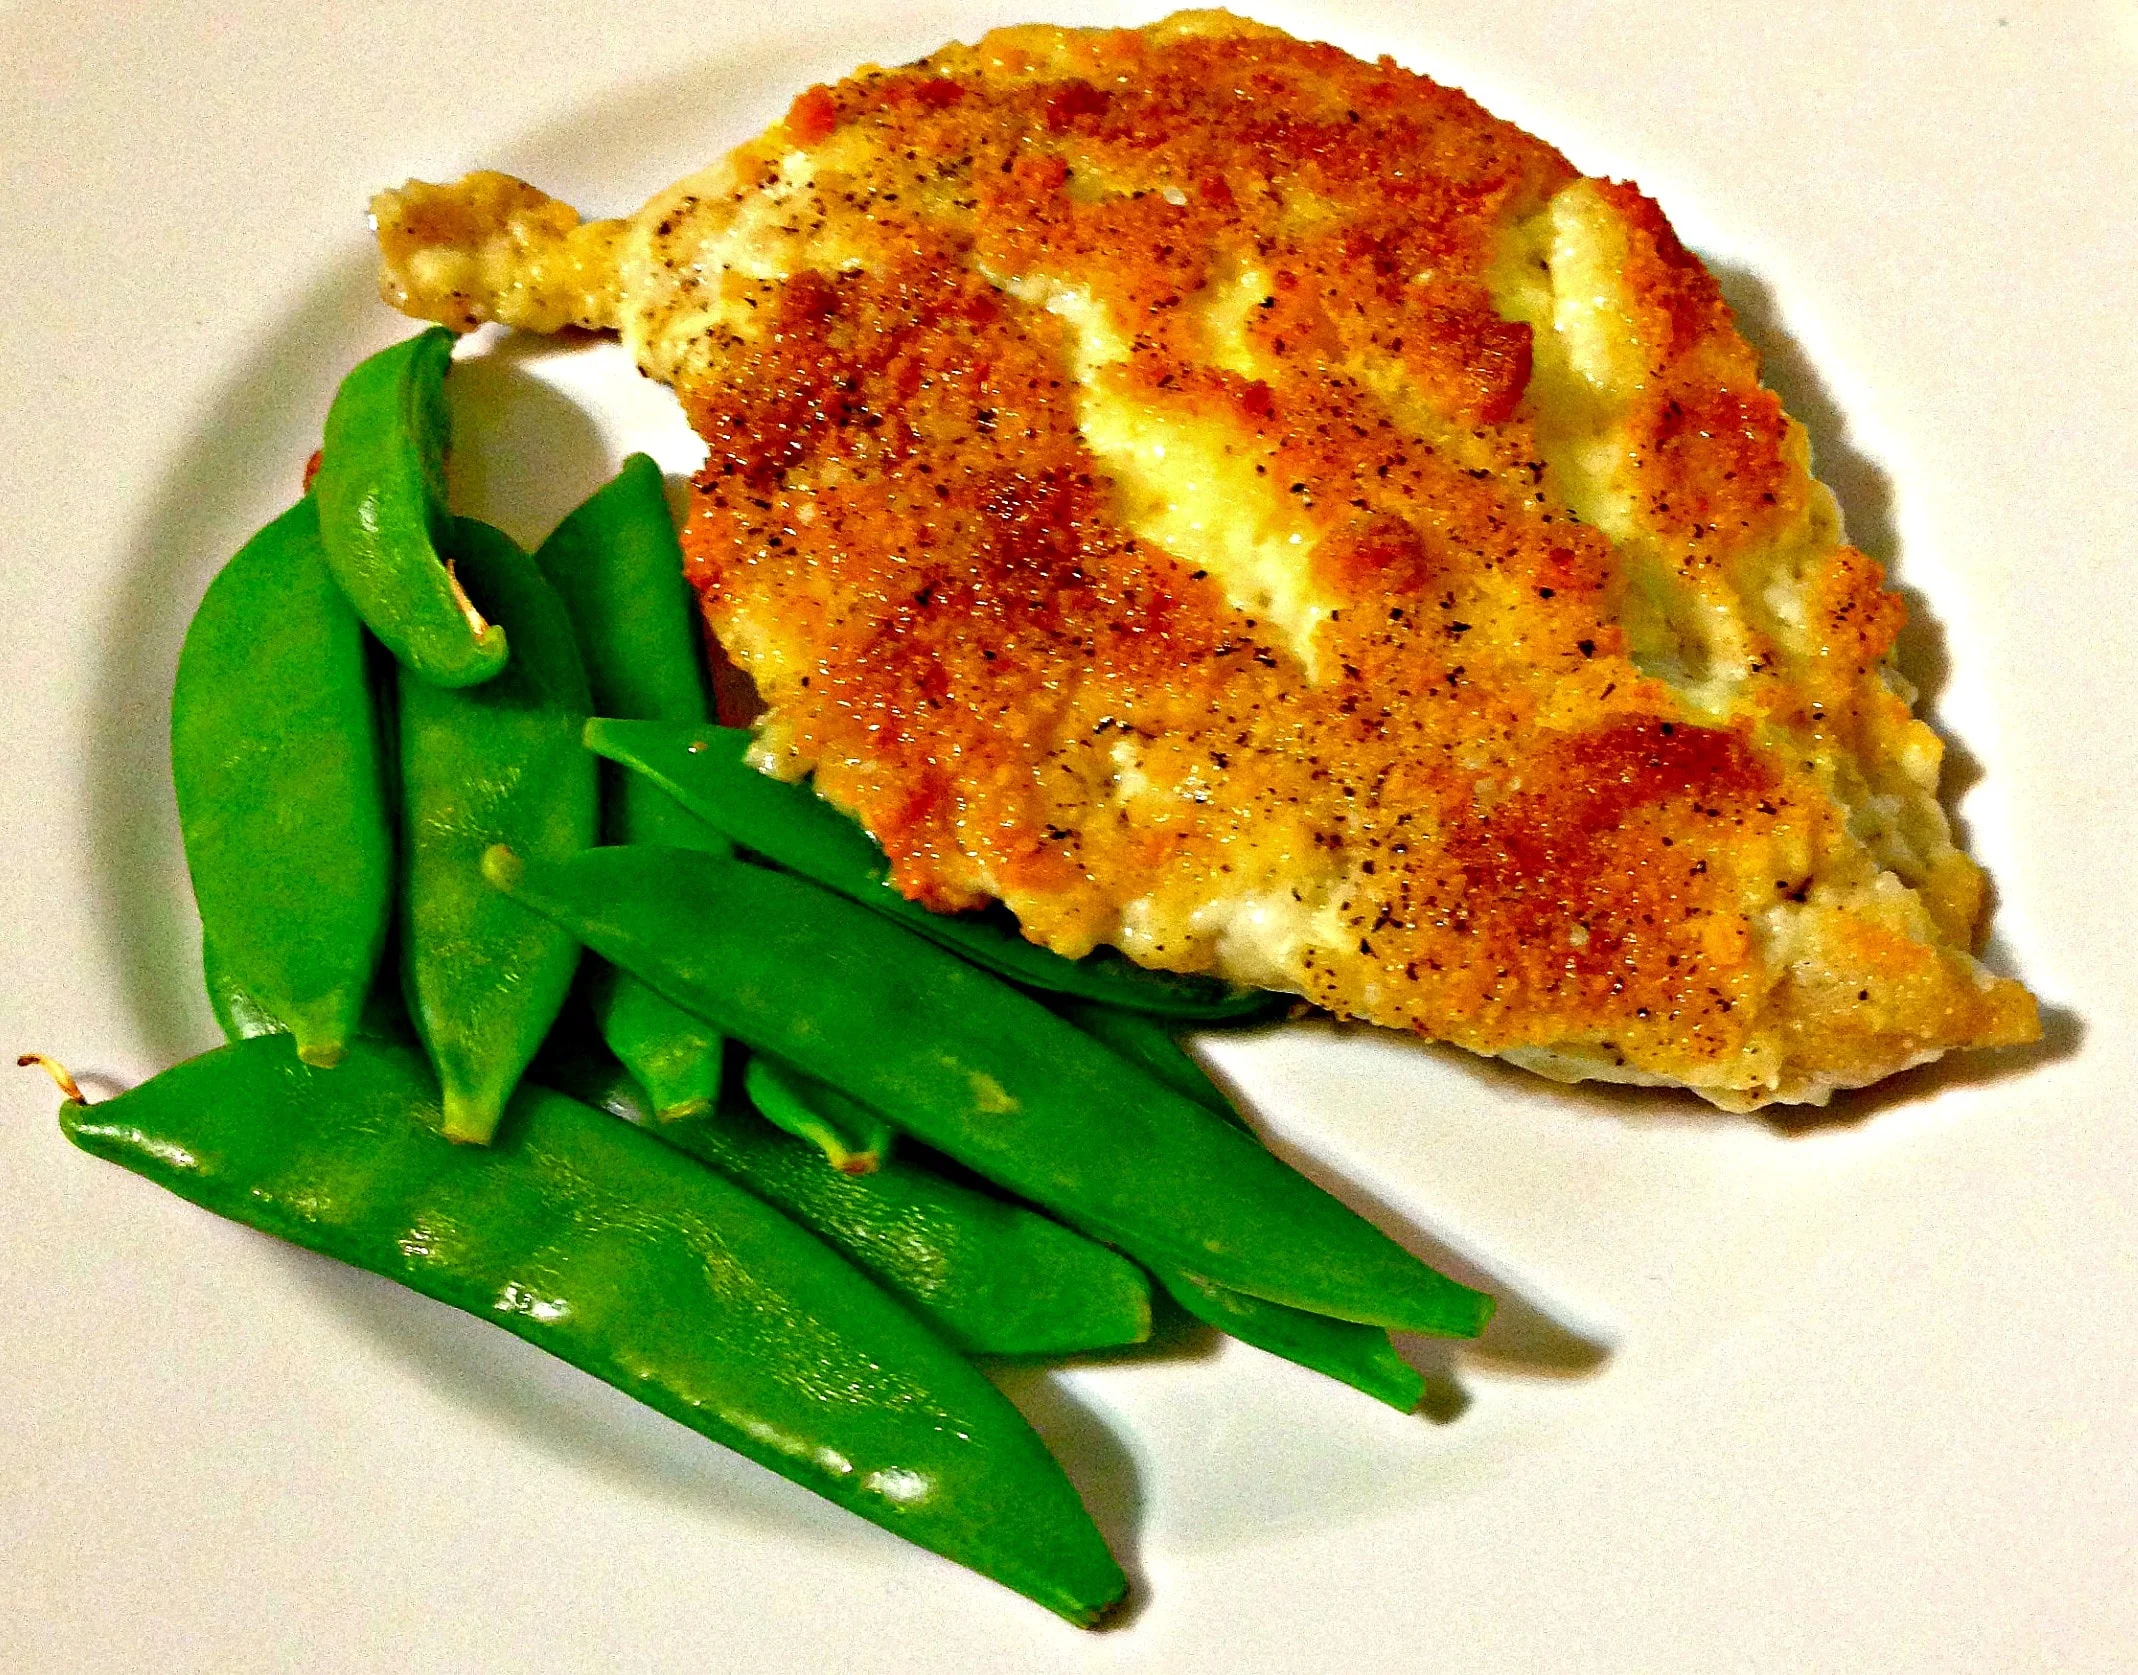 Chicken with breading and green snow peas on a white plate